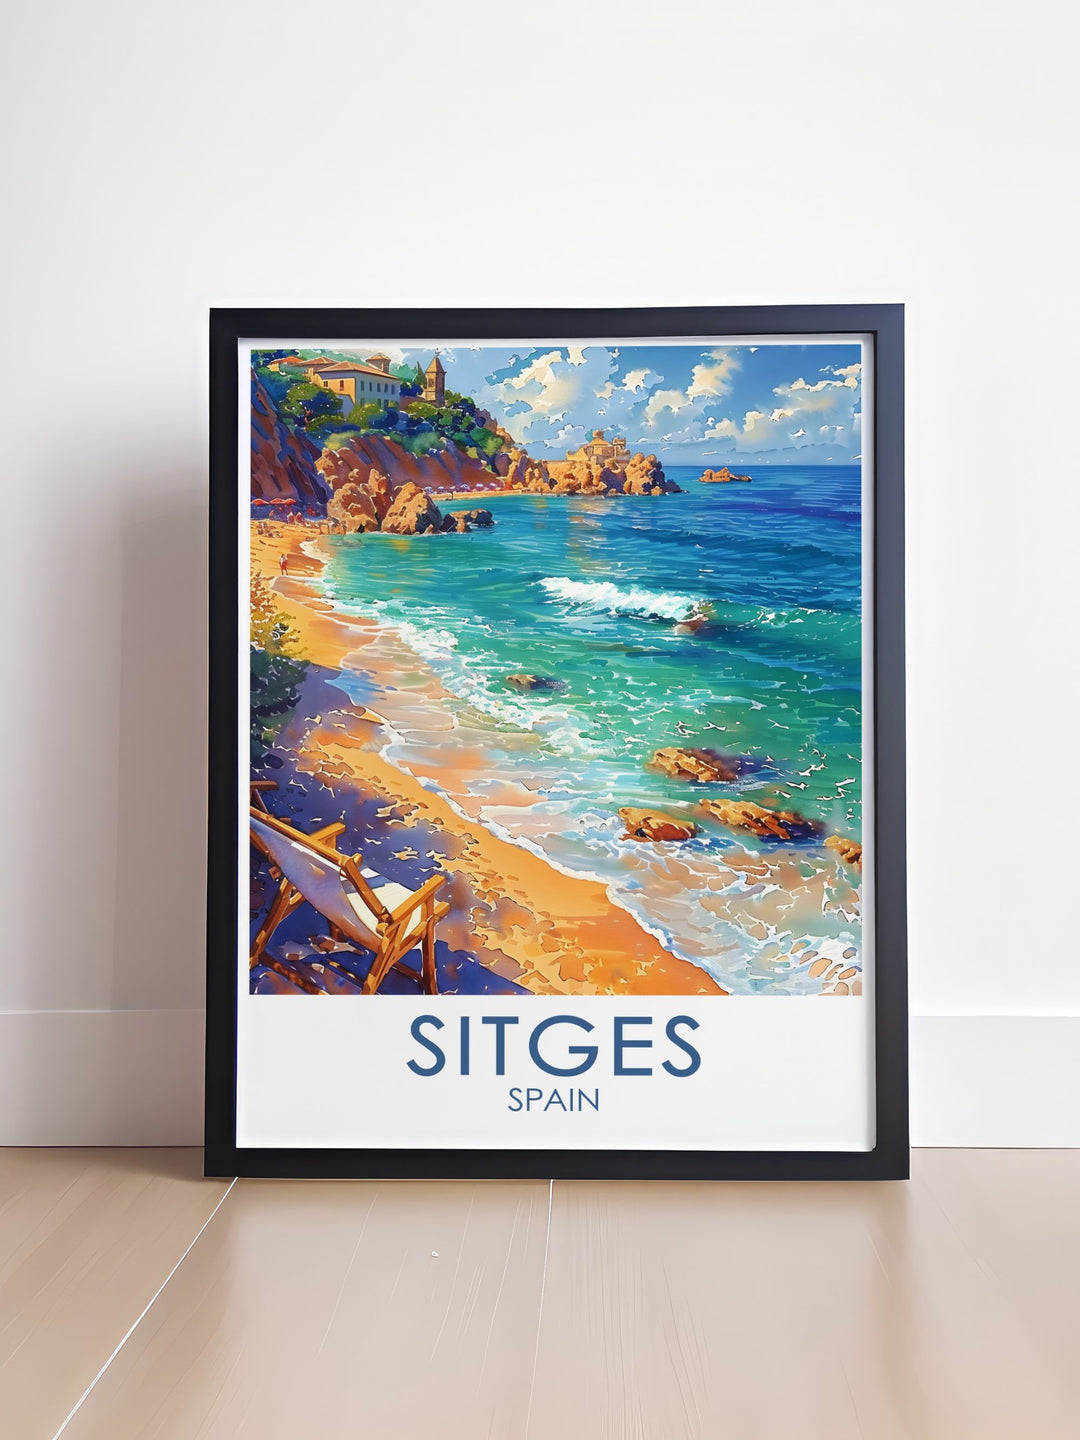 Featuring the serene beaches of Sitges, this poster showcases the tranquil and inviting atmosphere of this coastal town, perfect for anyone seeking a relaxing Mediterranean retreat.